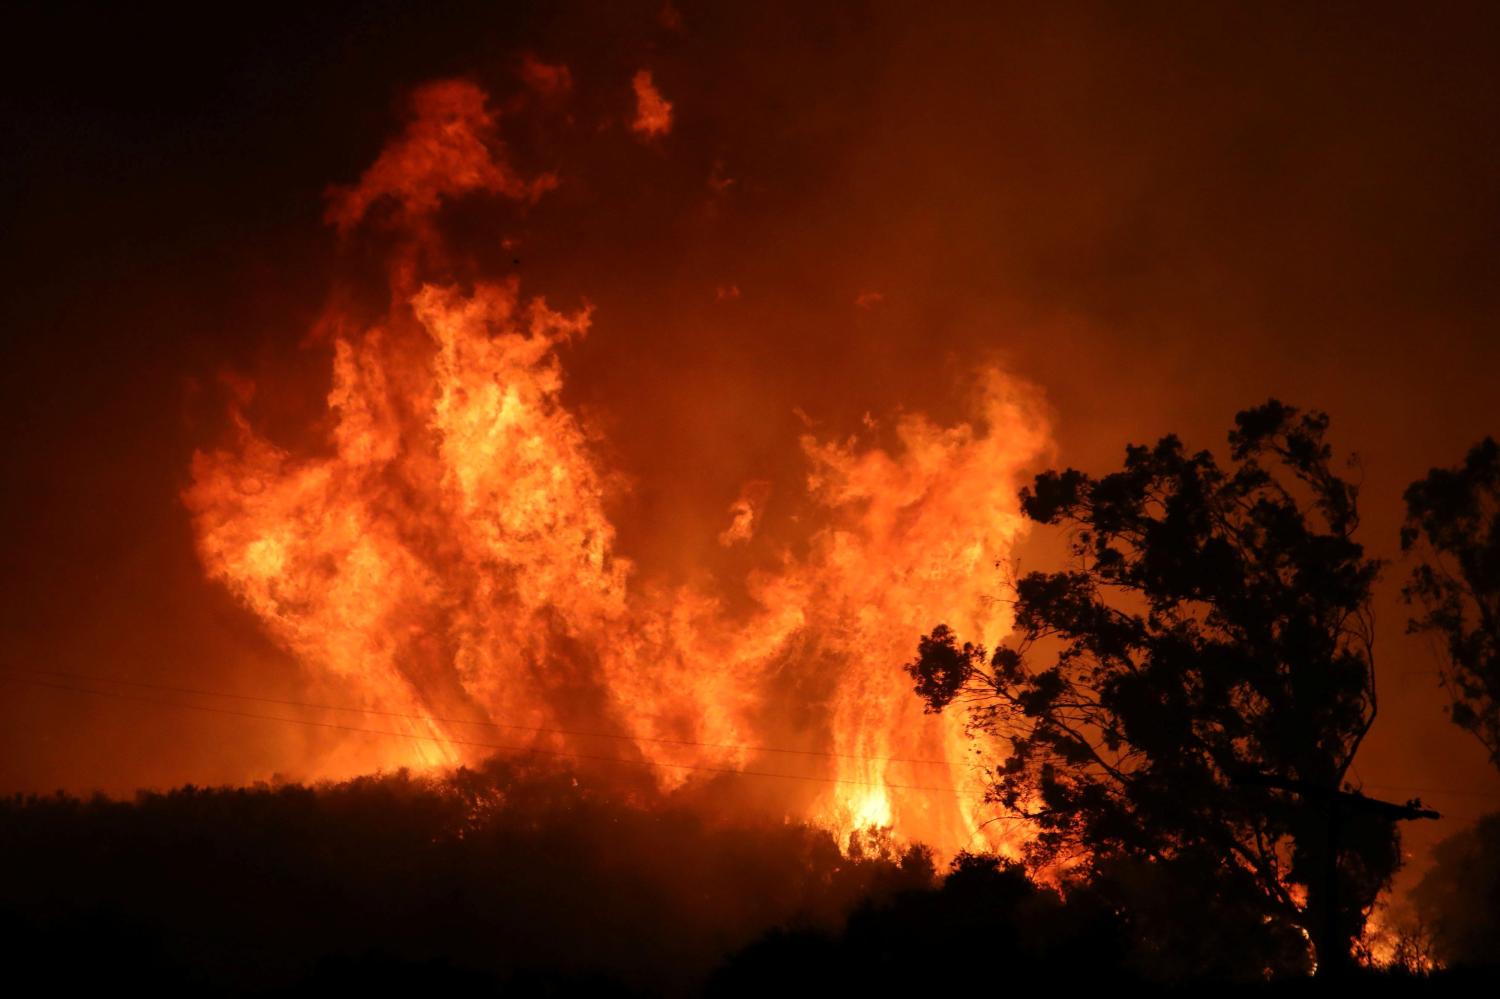 Flames rise near trees during a wildfire dubbed the Cave Fire burning in the hills of Santa Barbara, California, U.S., November 26, 2019.     REUTERS/David McNew